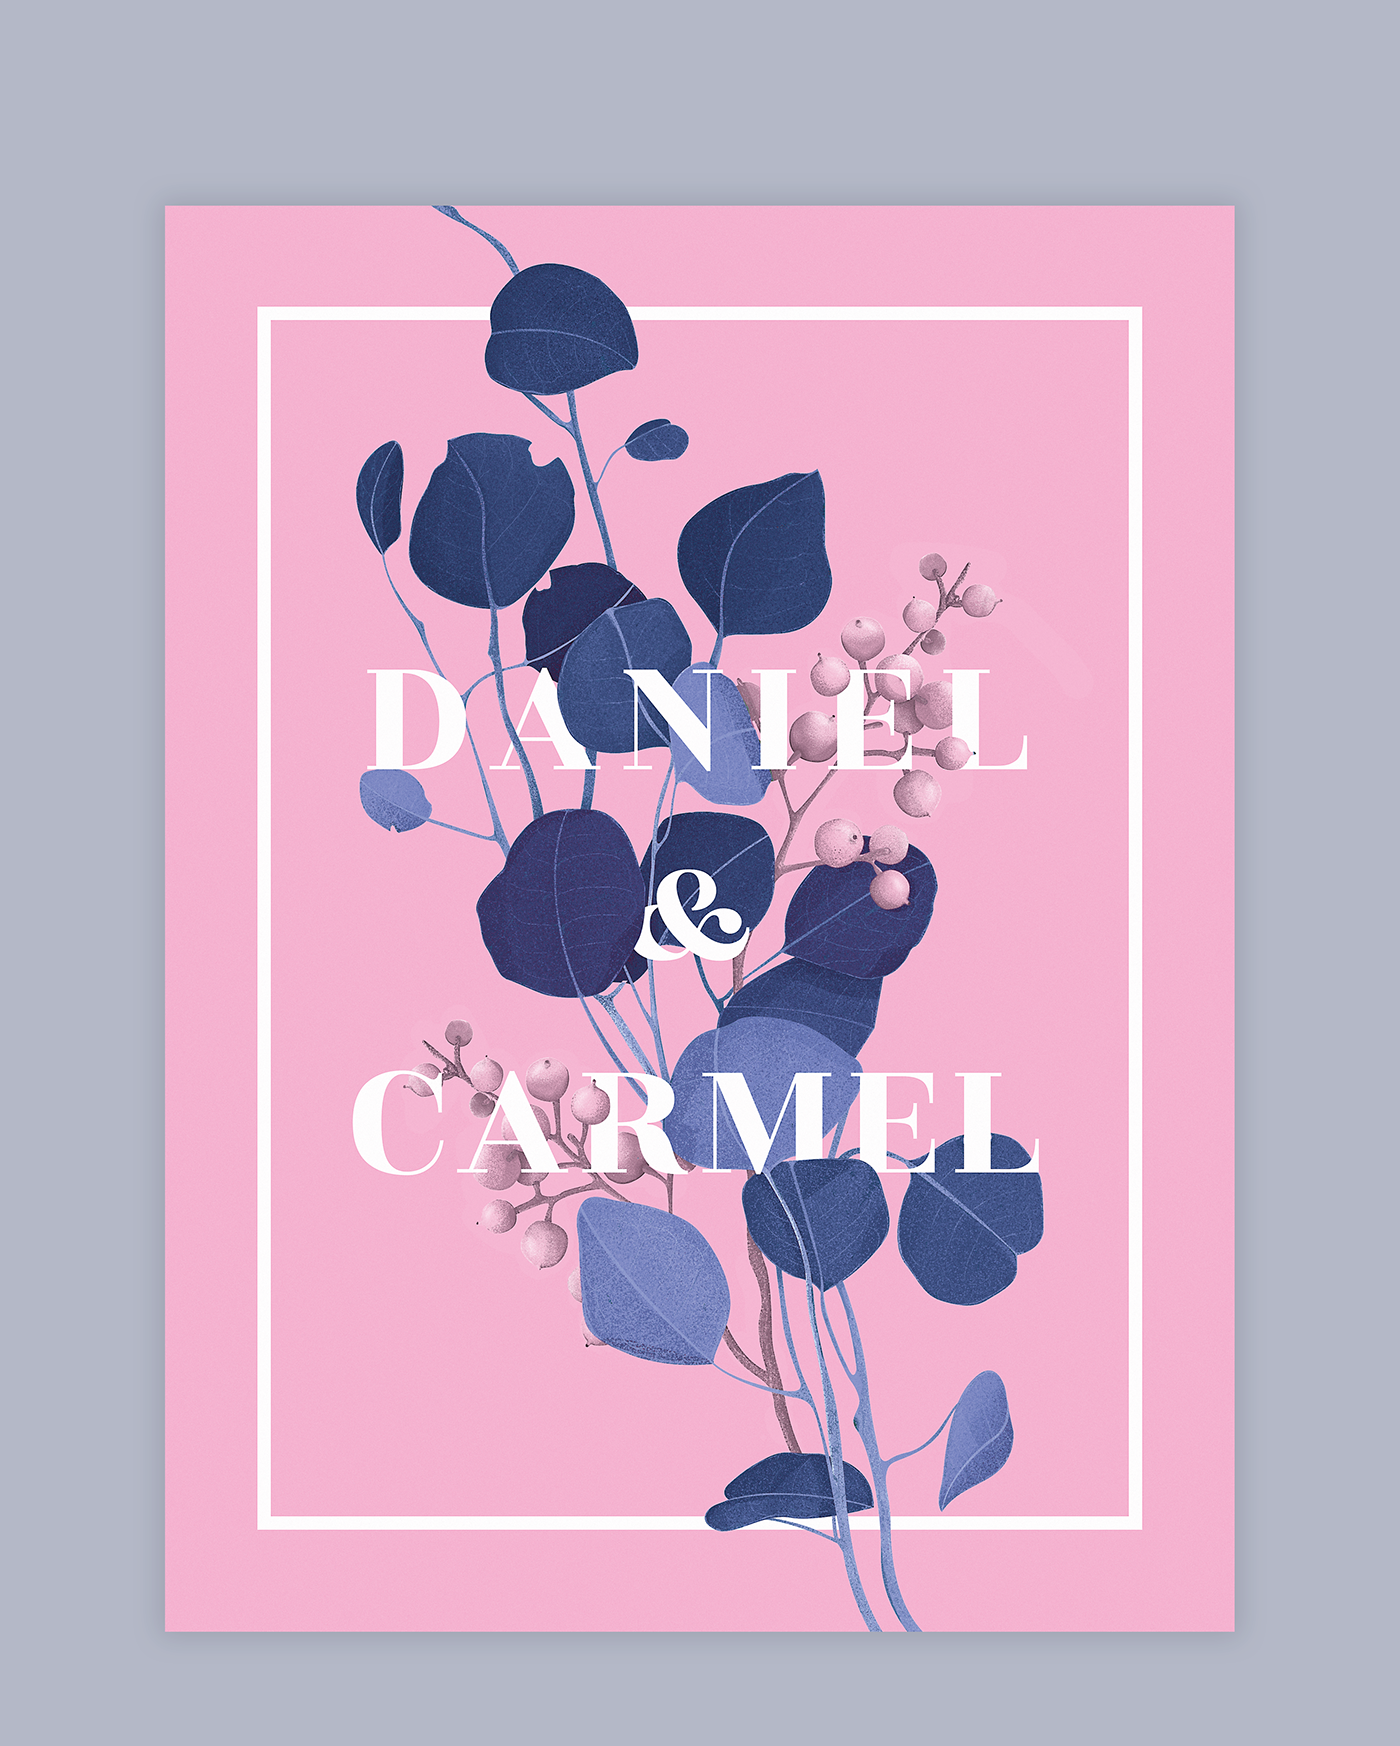 wedding invitations wedding invitation floral Fruit hand drawn pink and blue pink card daniel leaves